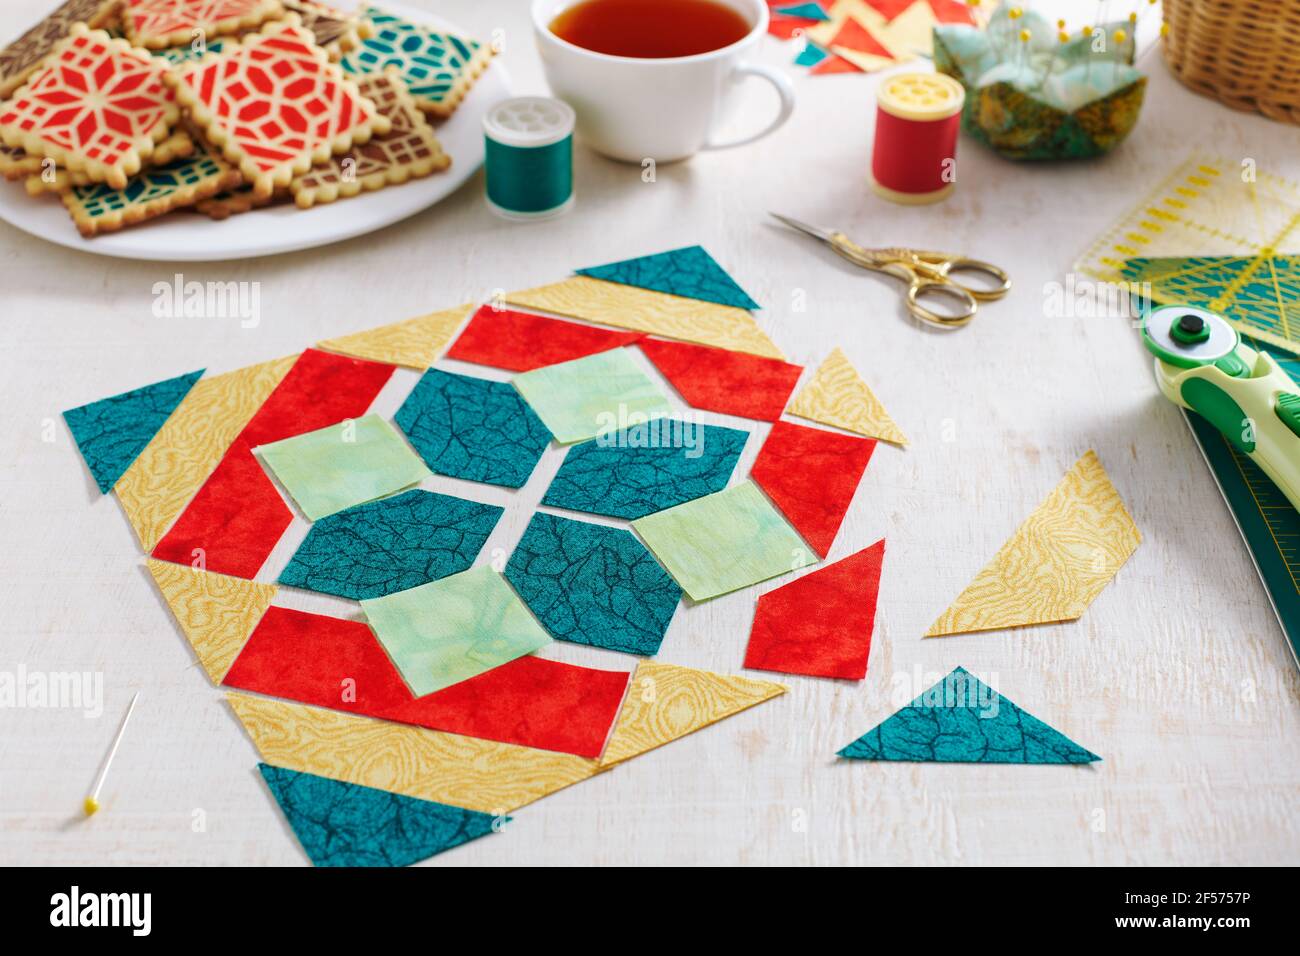 Pieces of fabric laid out in the shape of a patchwork block, a  heap of cookies with a pattern imitating a patchwork block, a cup of tea, sewing and q Stock Photo